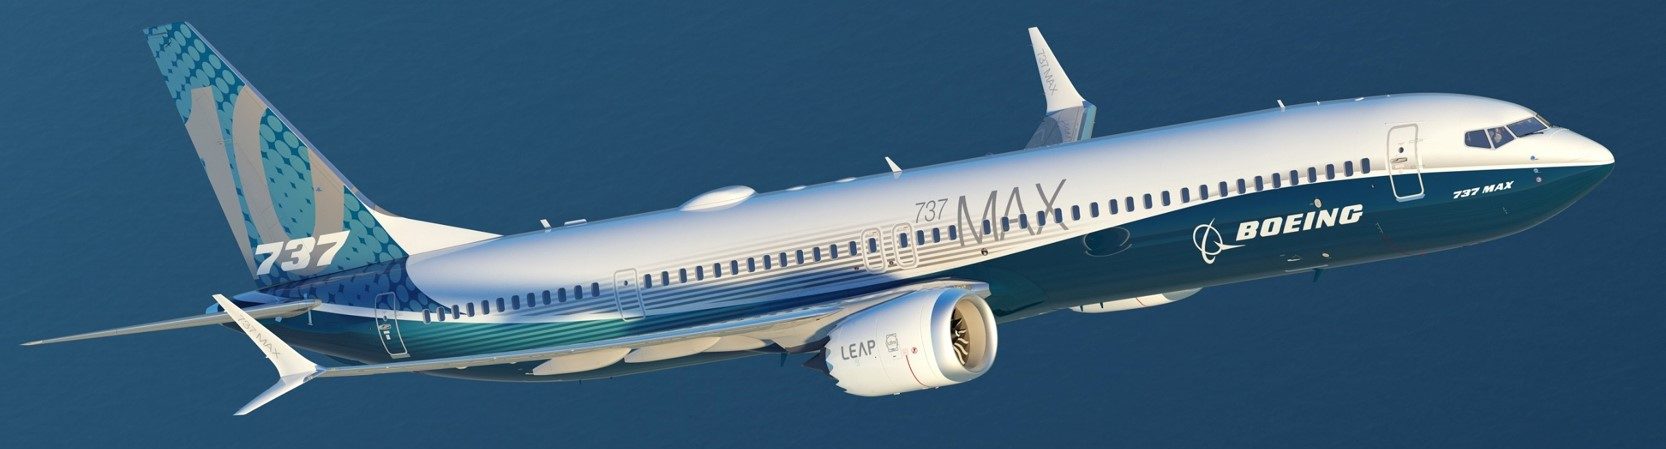 KLM UK Engineering acquires EASA Part 147 approval for the 737 MAX